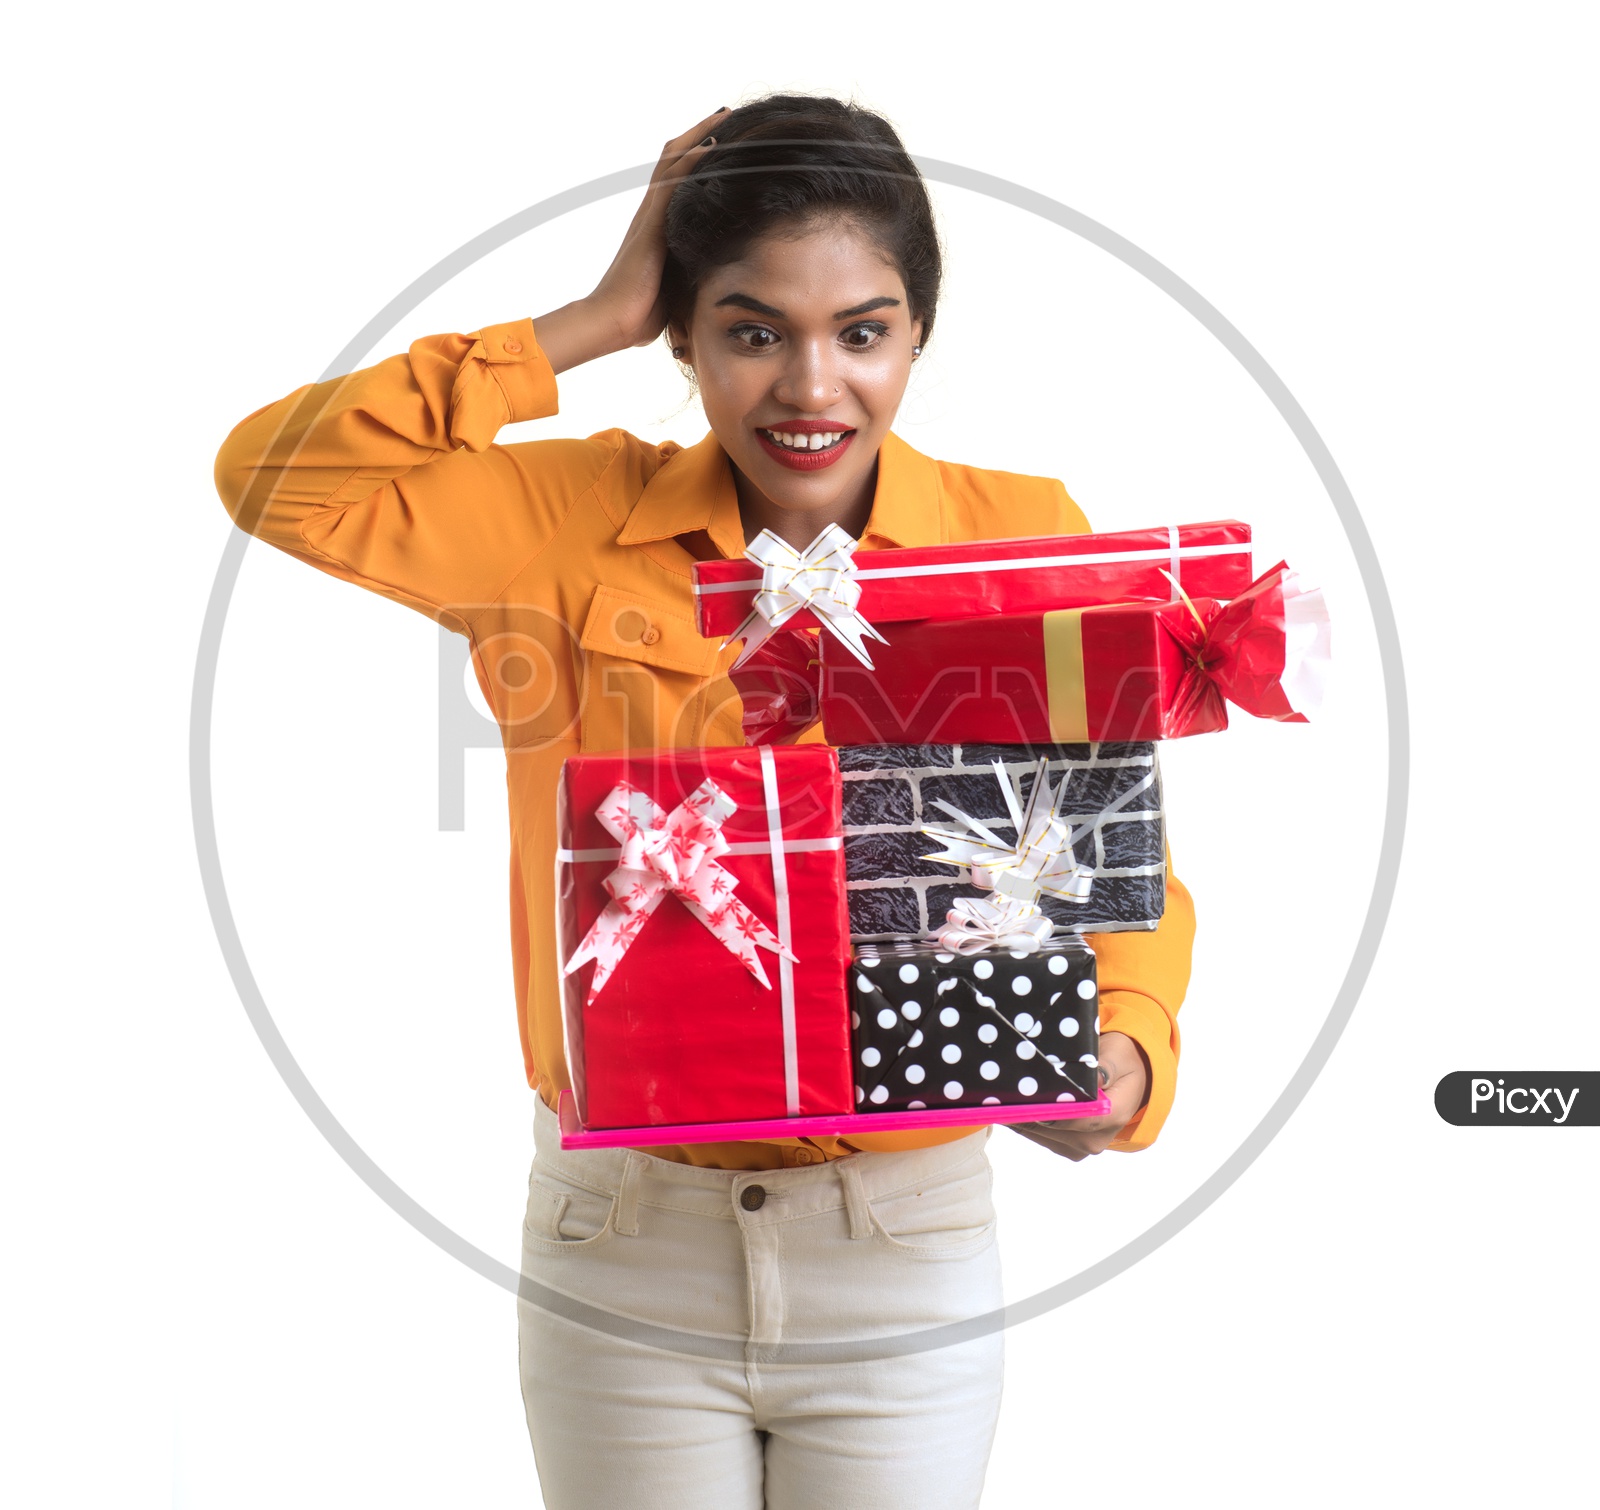 An Excited young Beautiful Indian Girl Holding Gift Box in Hand on an Isolated White Background